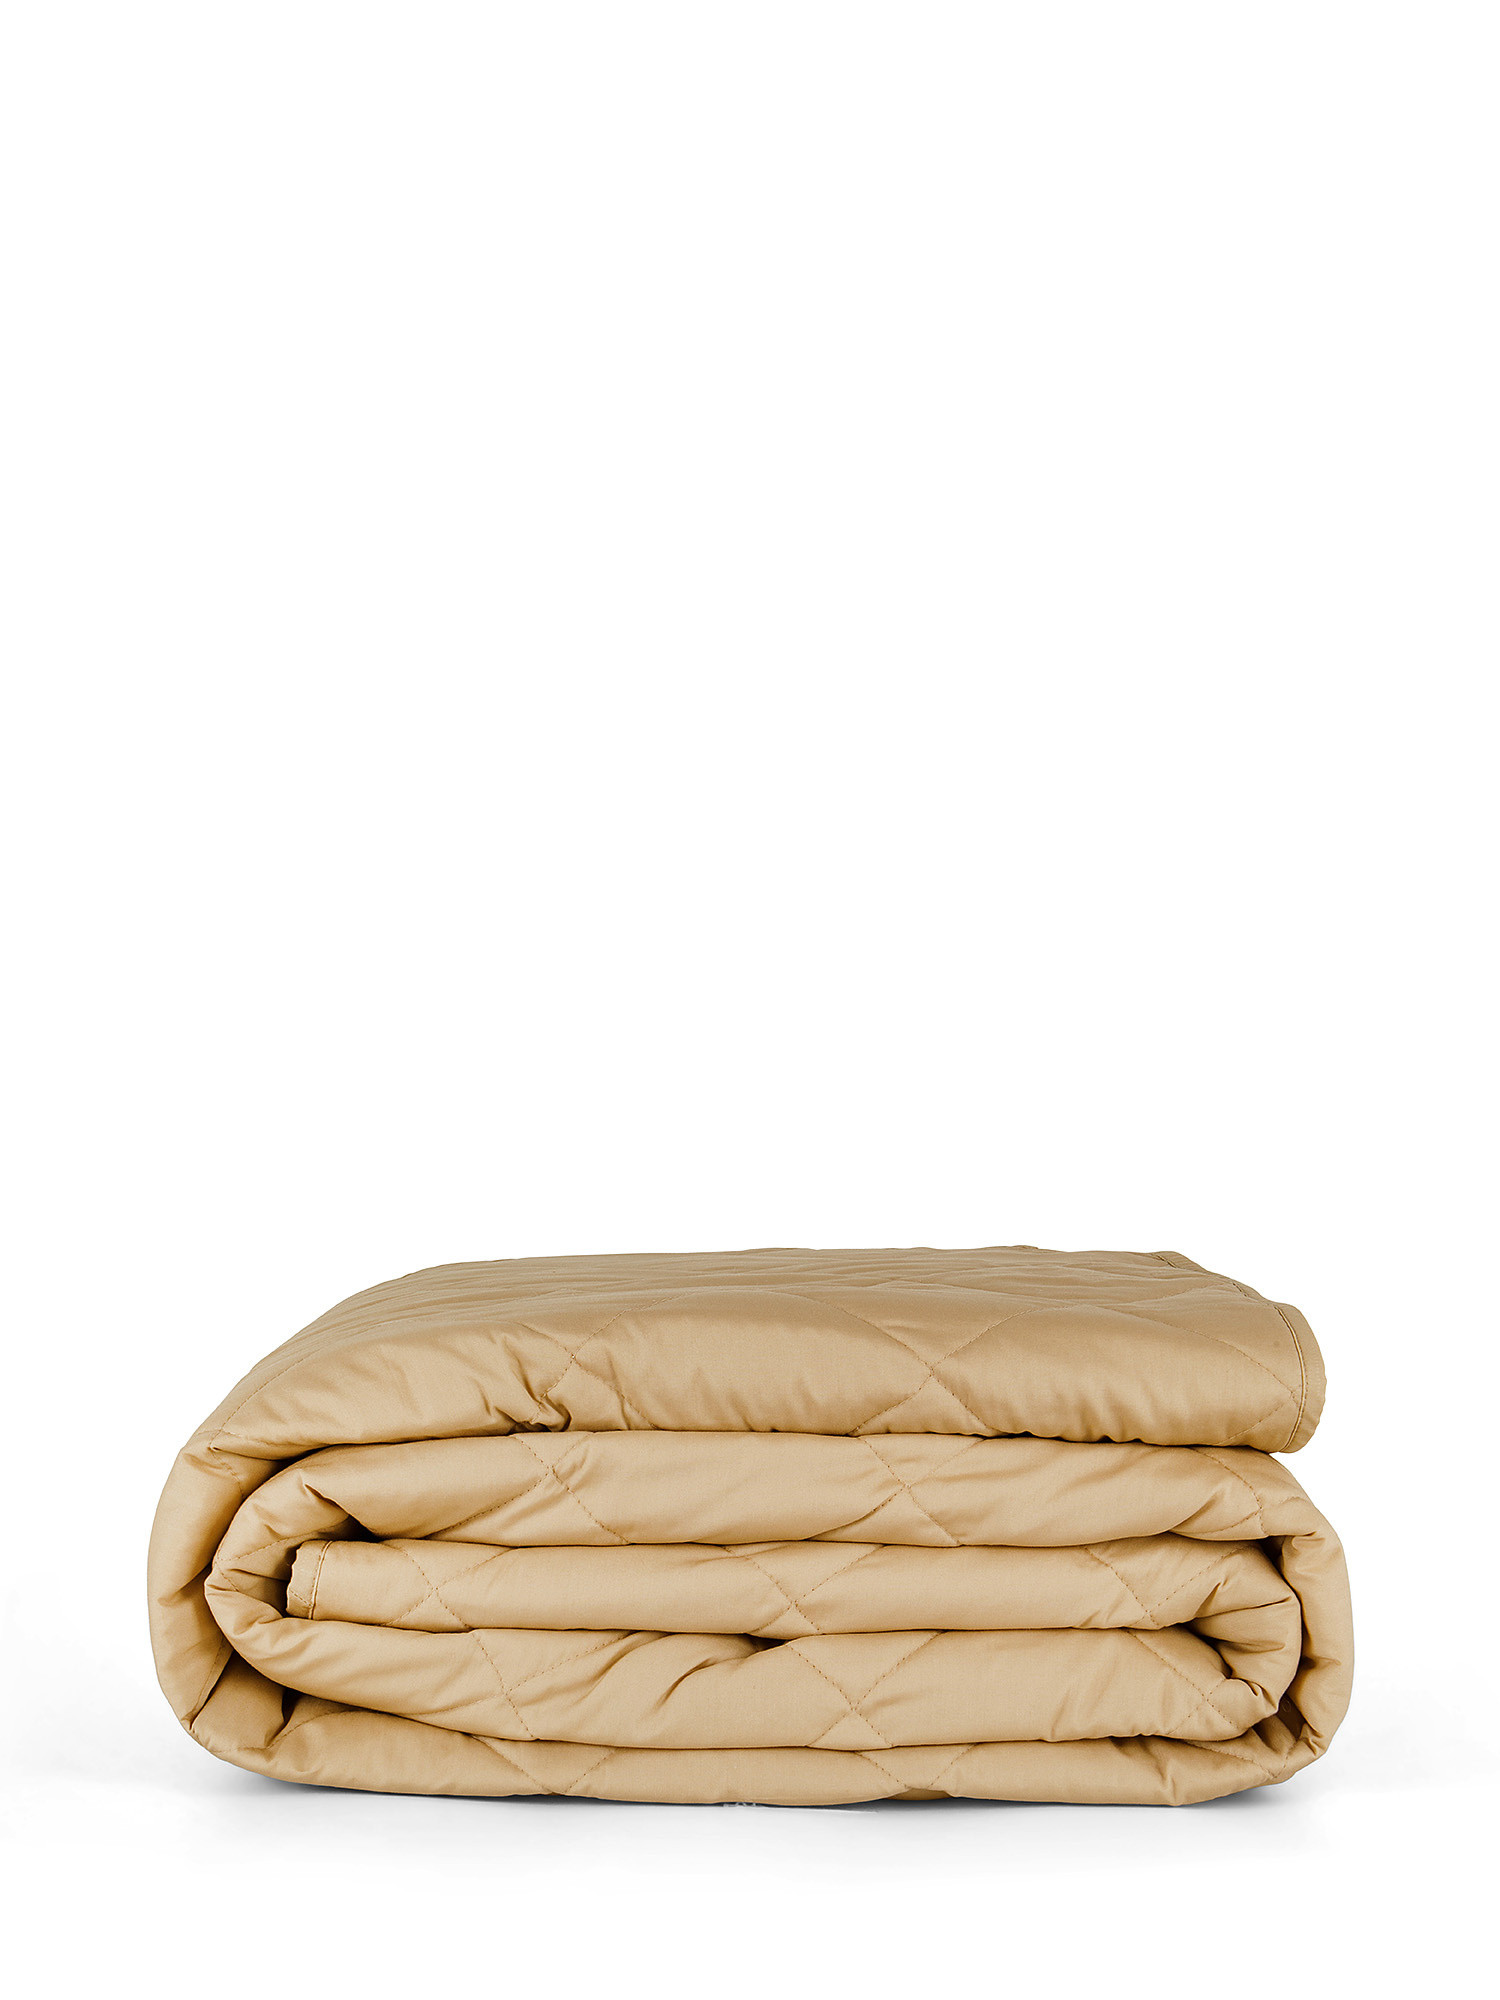 Solid color cotton percale quilt, Beige, large image number 0